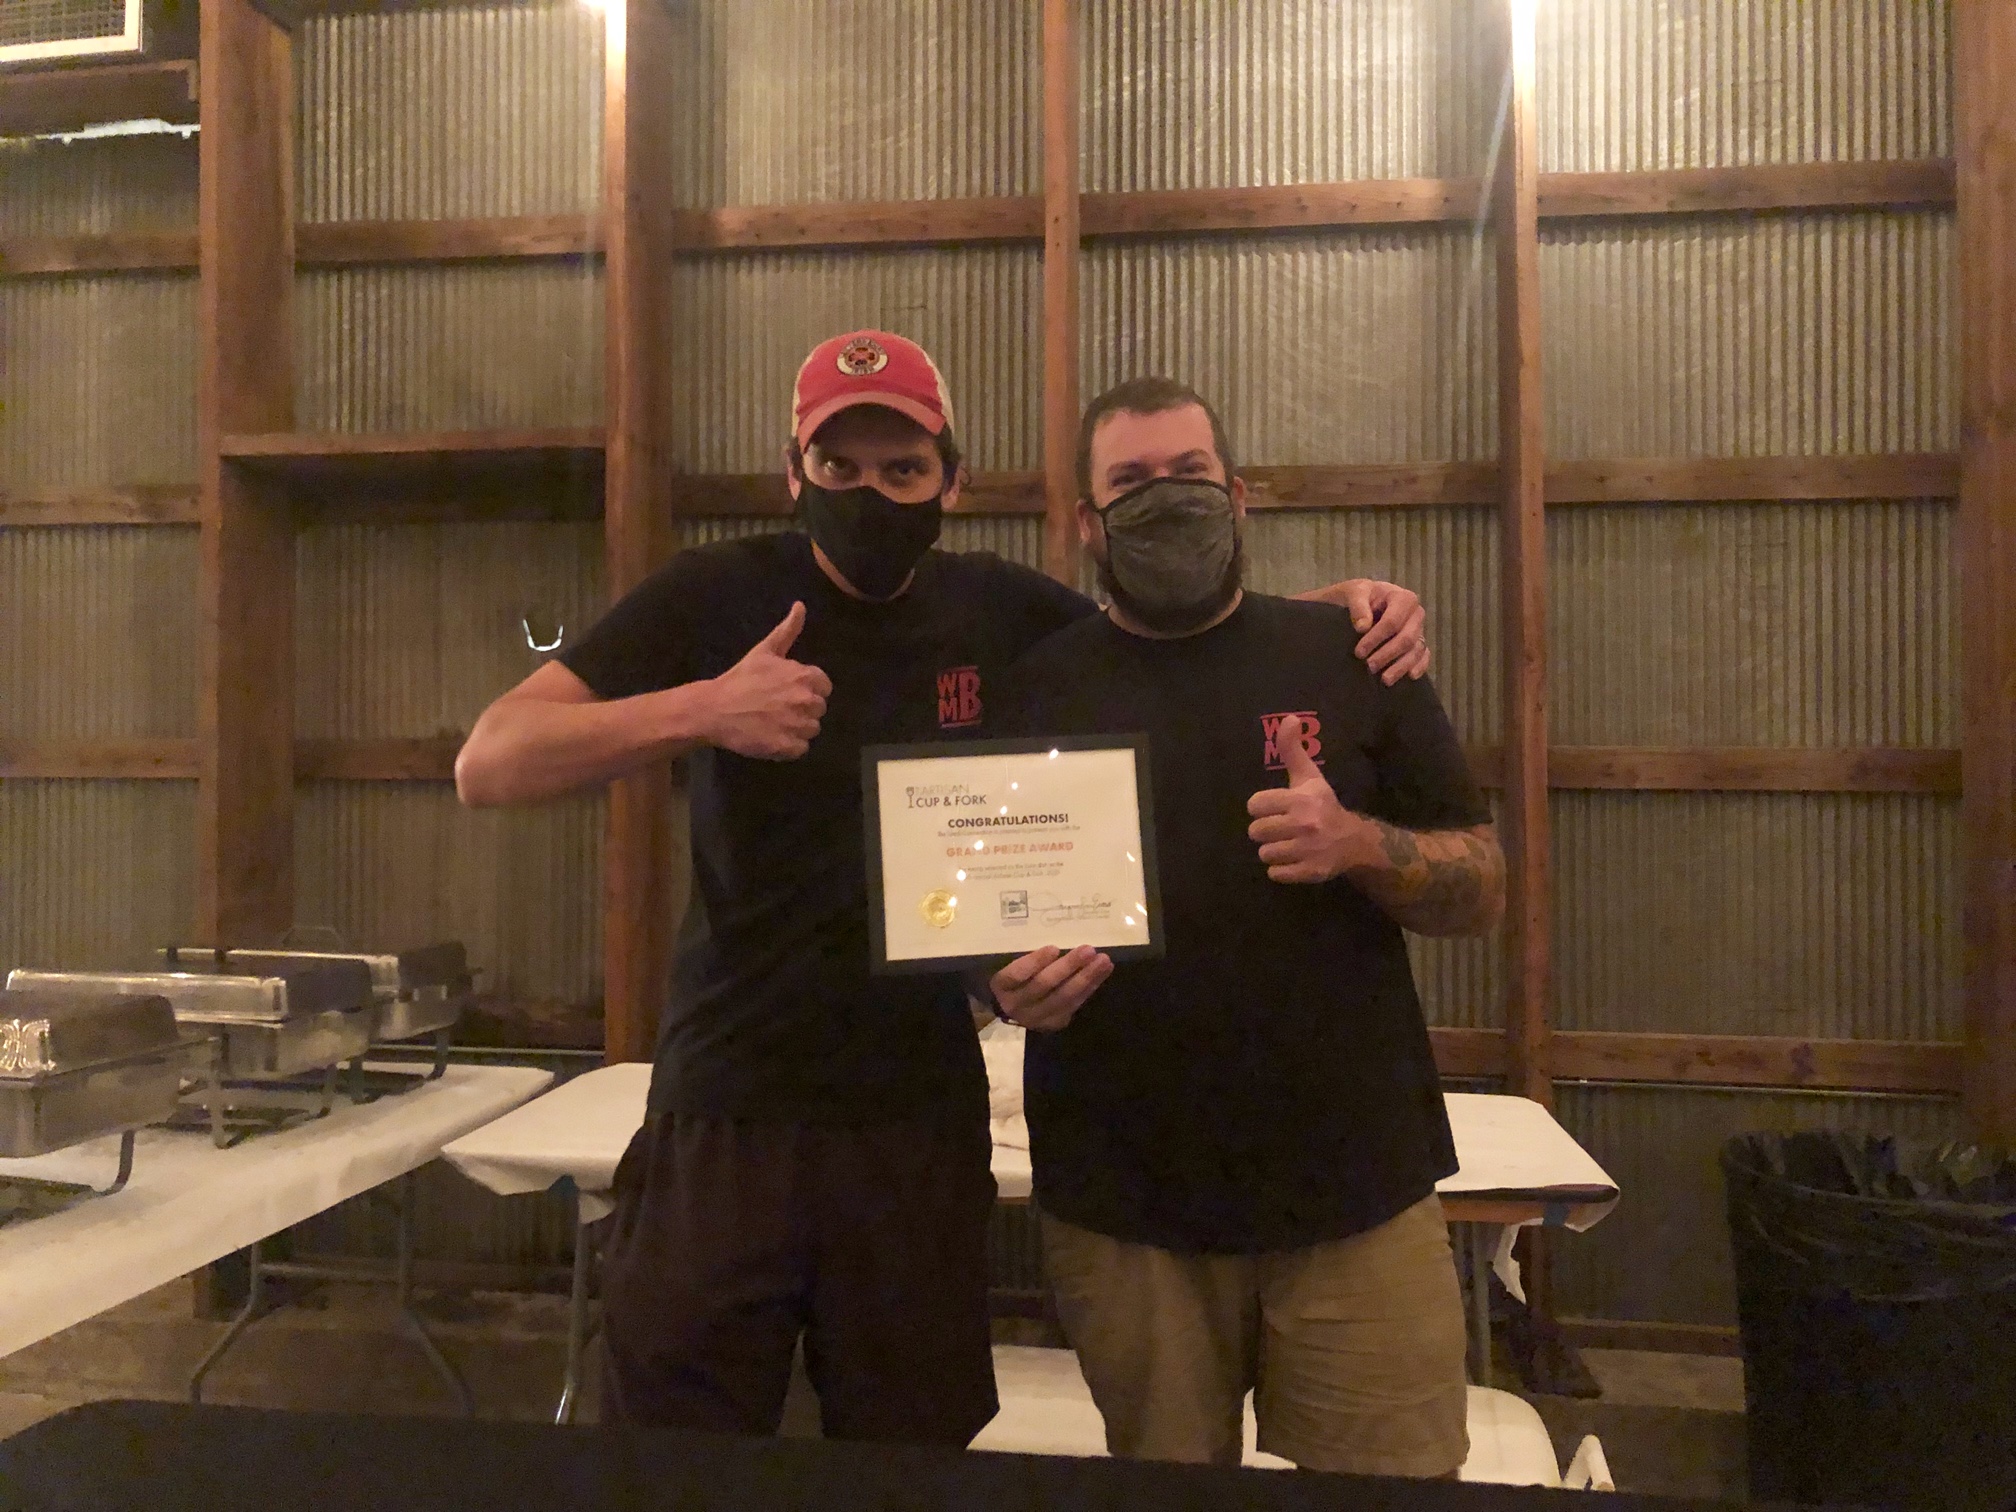 In a dimly lit barn, the duo of Weird Meat Boyz are giving thumbs up and holding the Judge's Choice Award for the Artisan Cup and Fork 2021 event. They are masked. Photo by Alyssa Buckley.